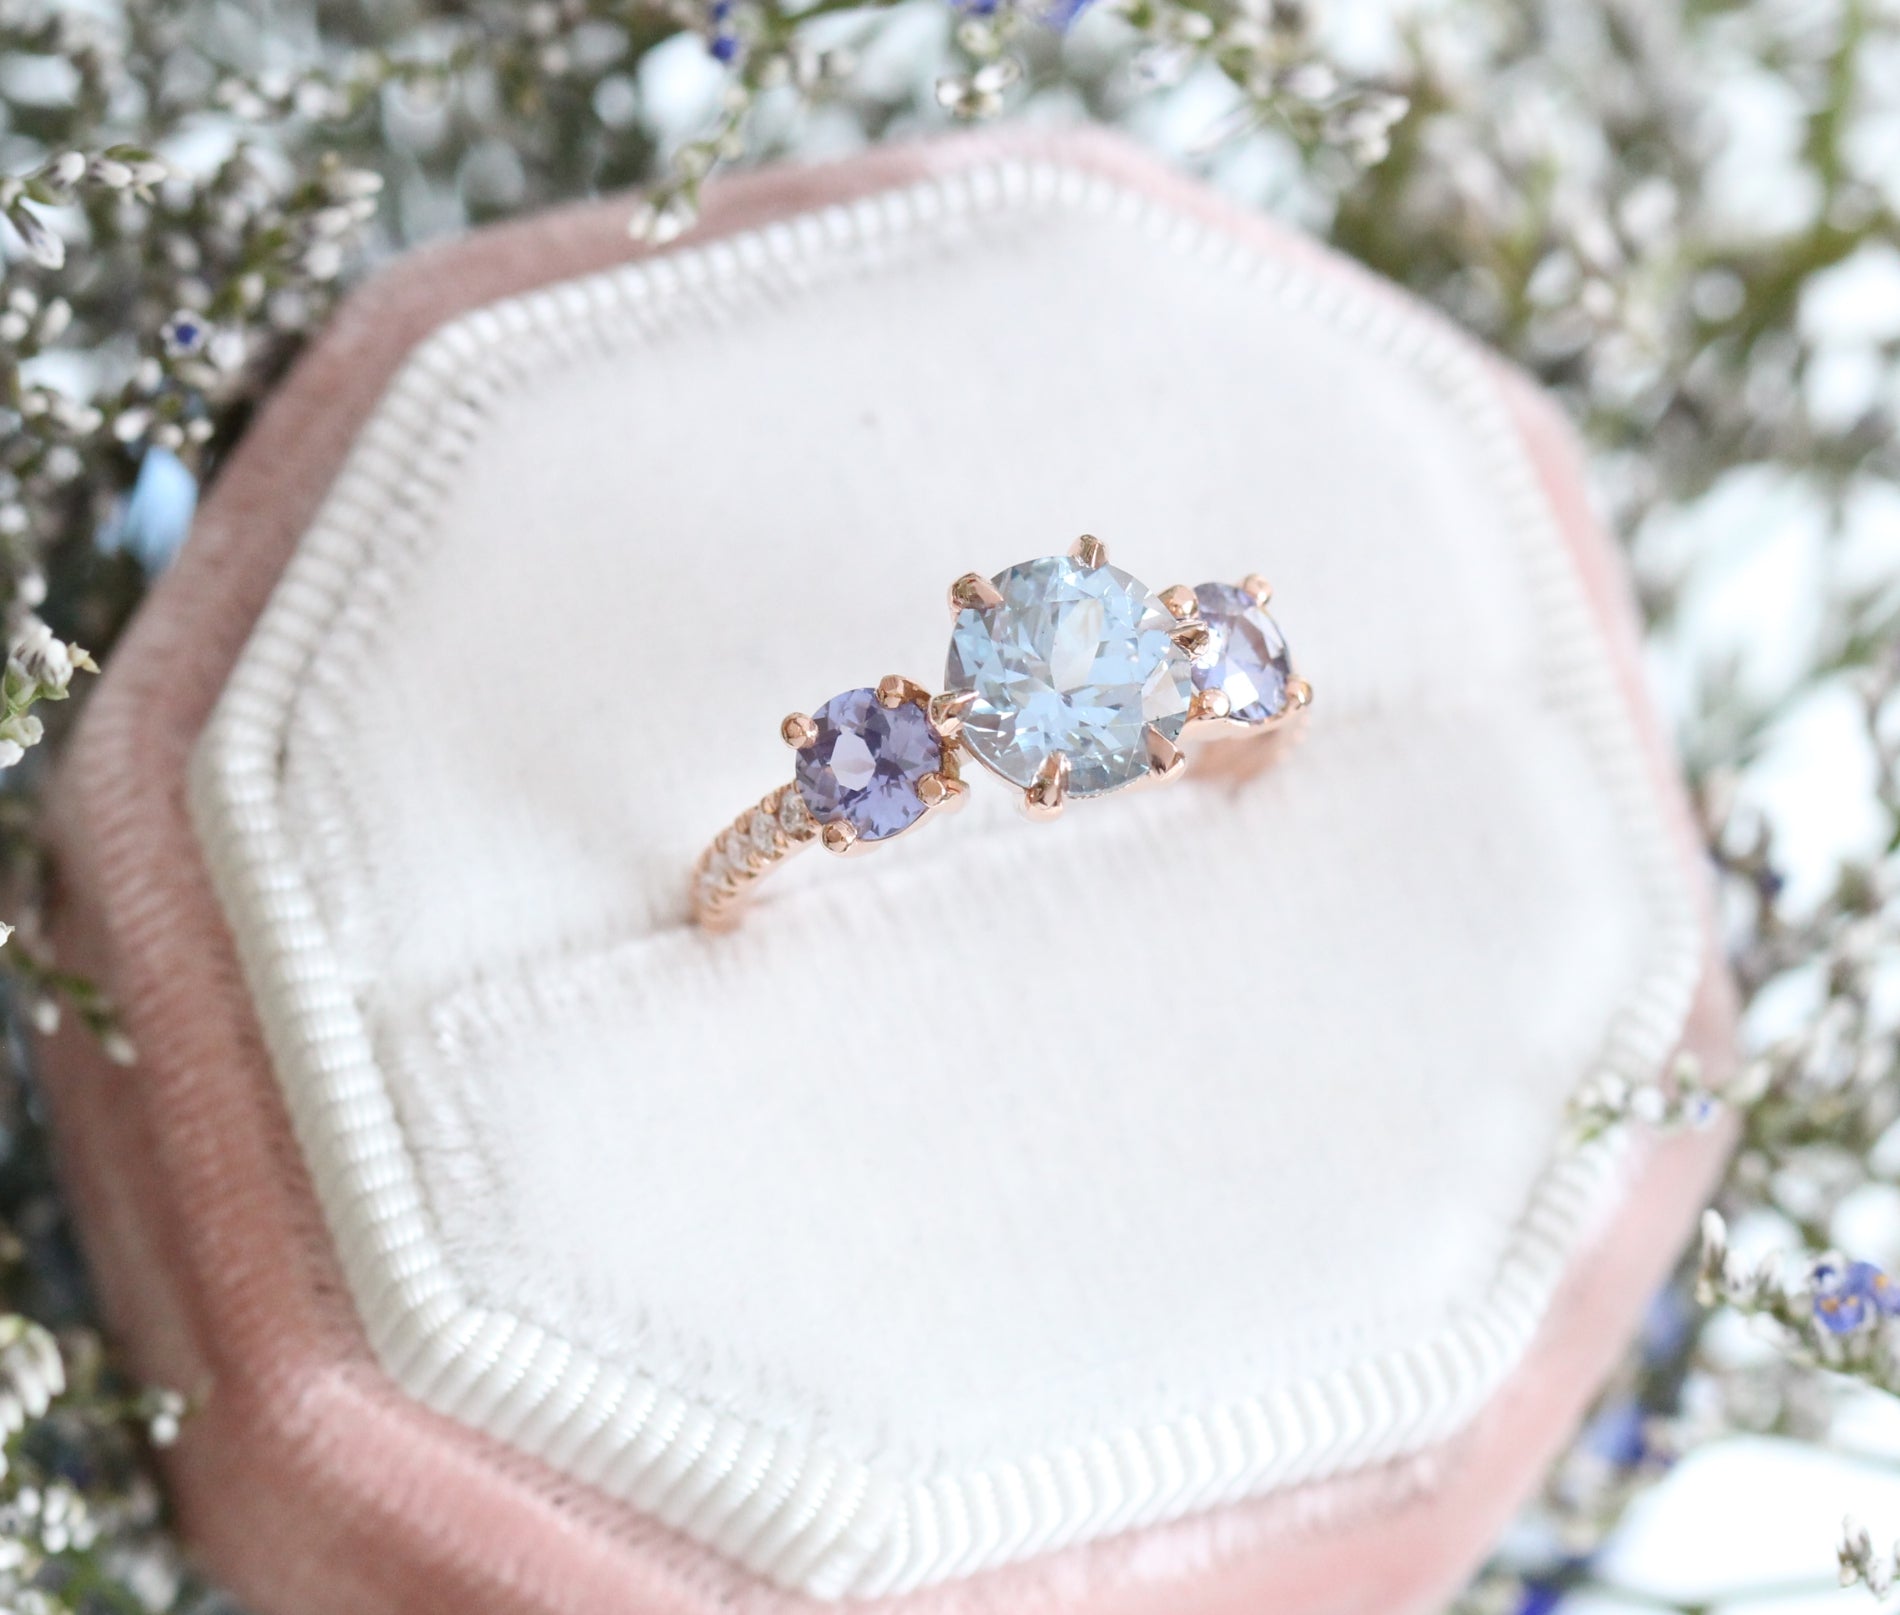 Aqua Blue Sapphire Engagement Ring in Rose Gold 3 Stone Diamond Ring by La More Design Jewelry